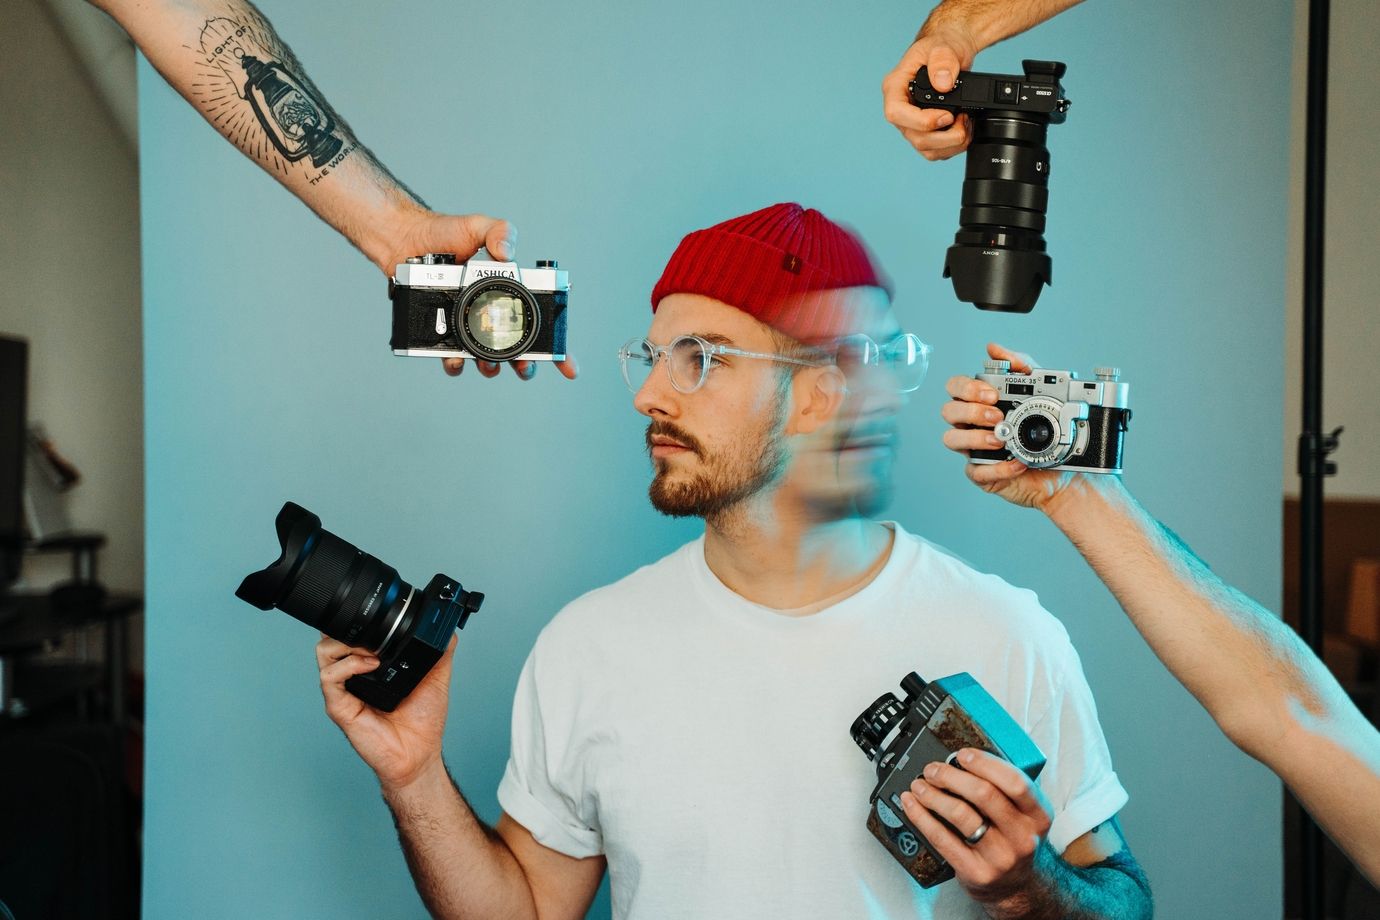 photography business gear cameras how to start guide